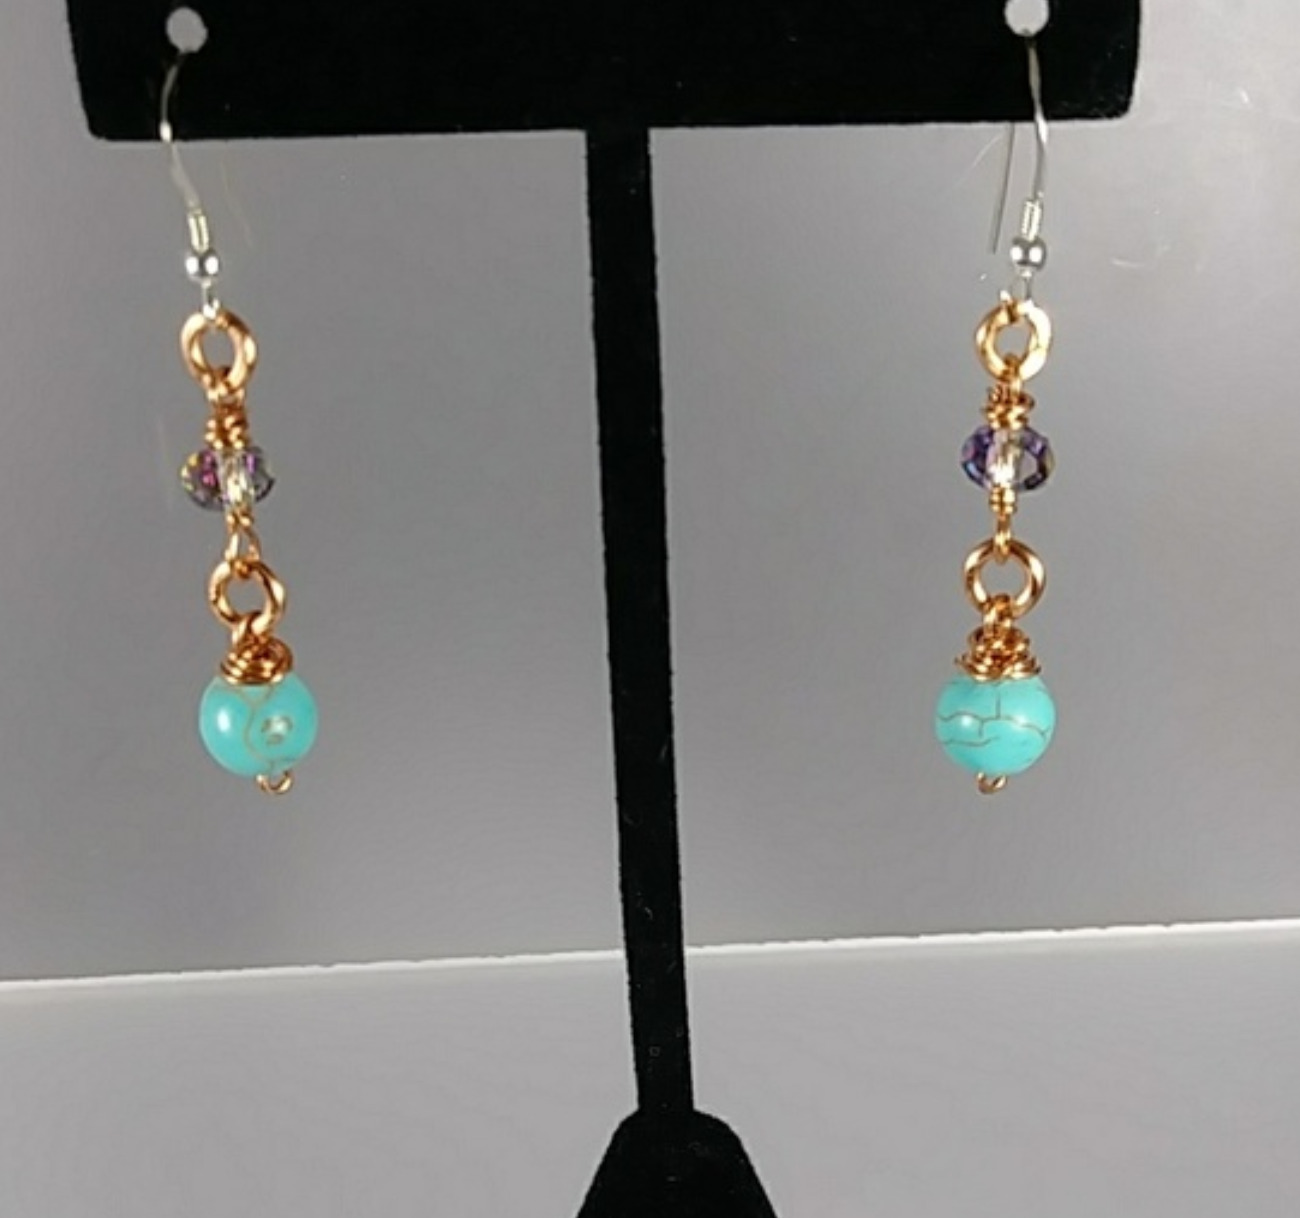 618 - EAR - Description: Earrings: Material: Copper Wire, Turquoise Howlite Gemstone, Swarovski - Crystal Sterling Earwire  Dimension: 1 3/4 ' L (Inches)